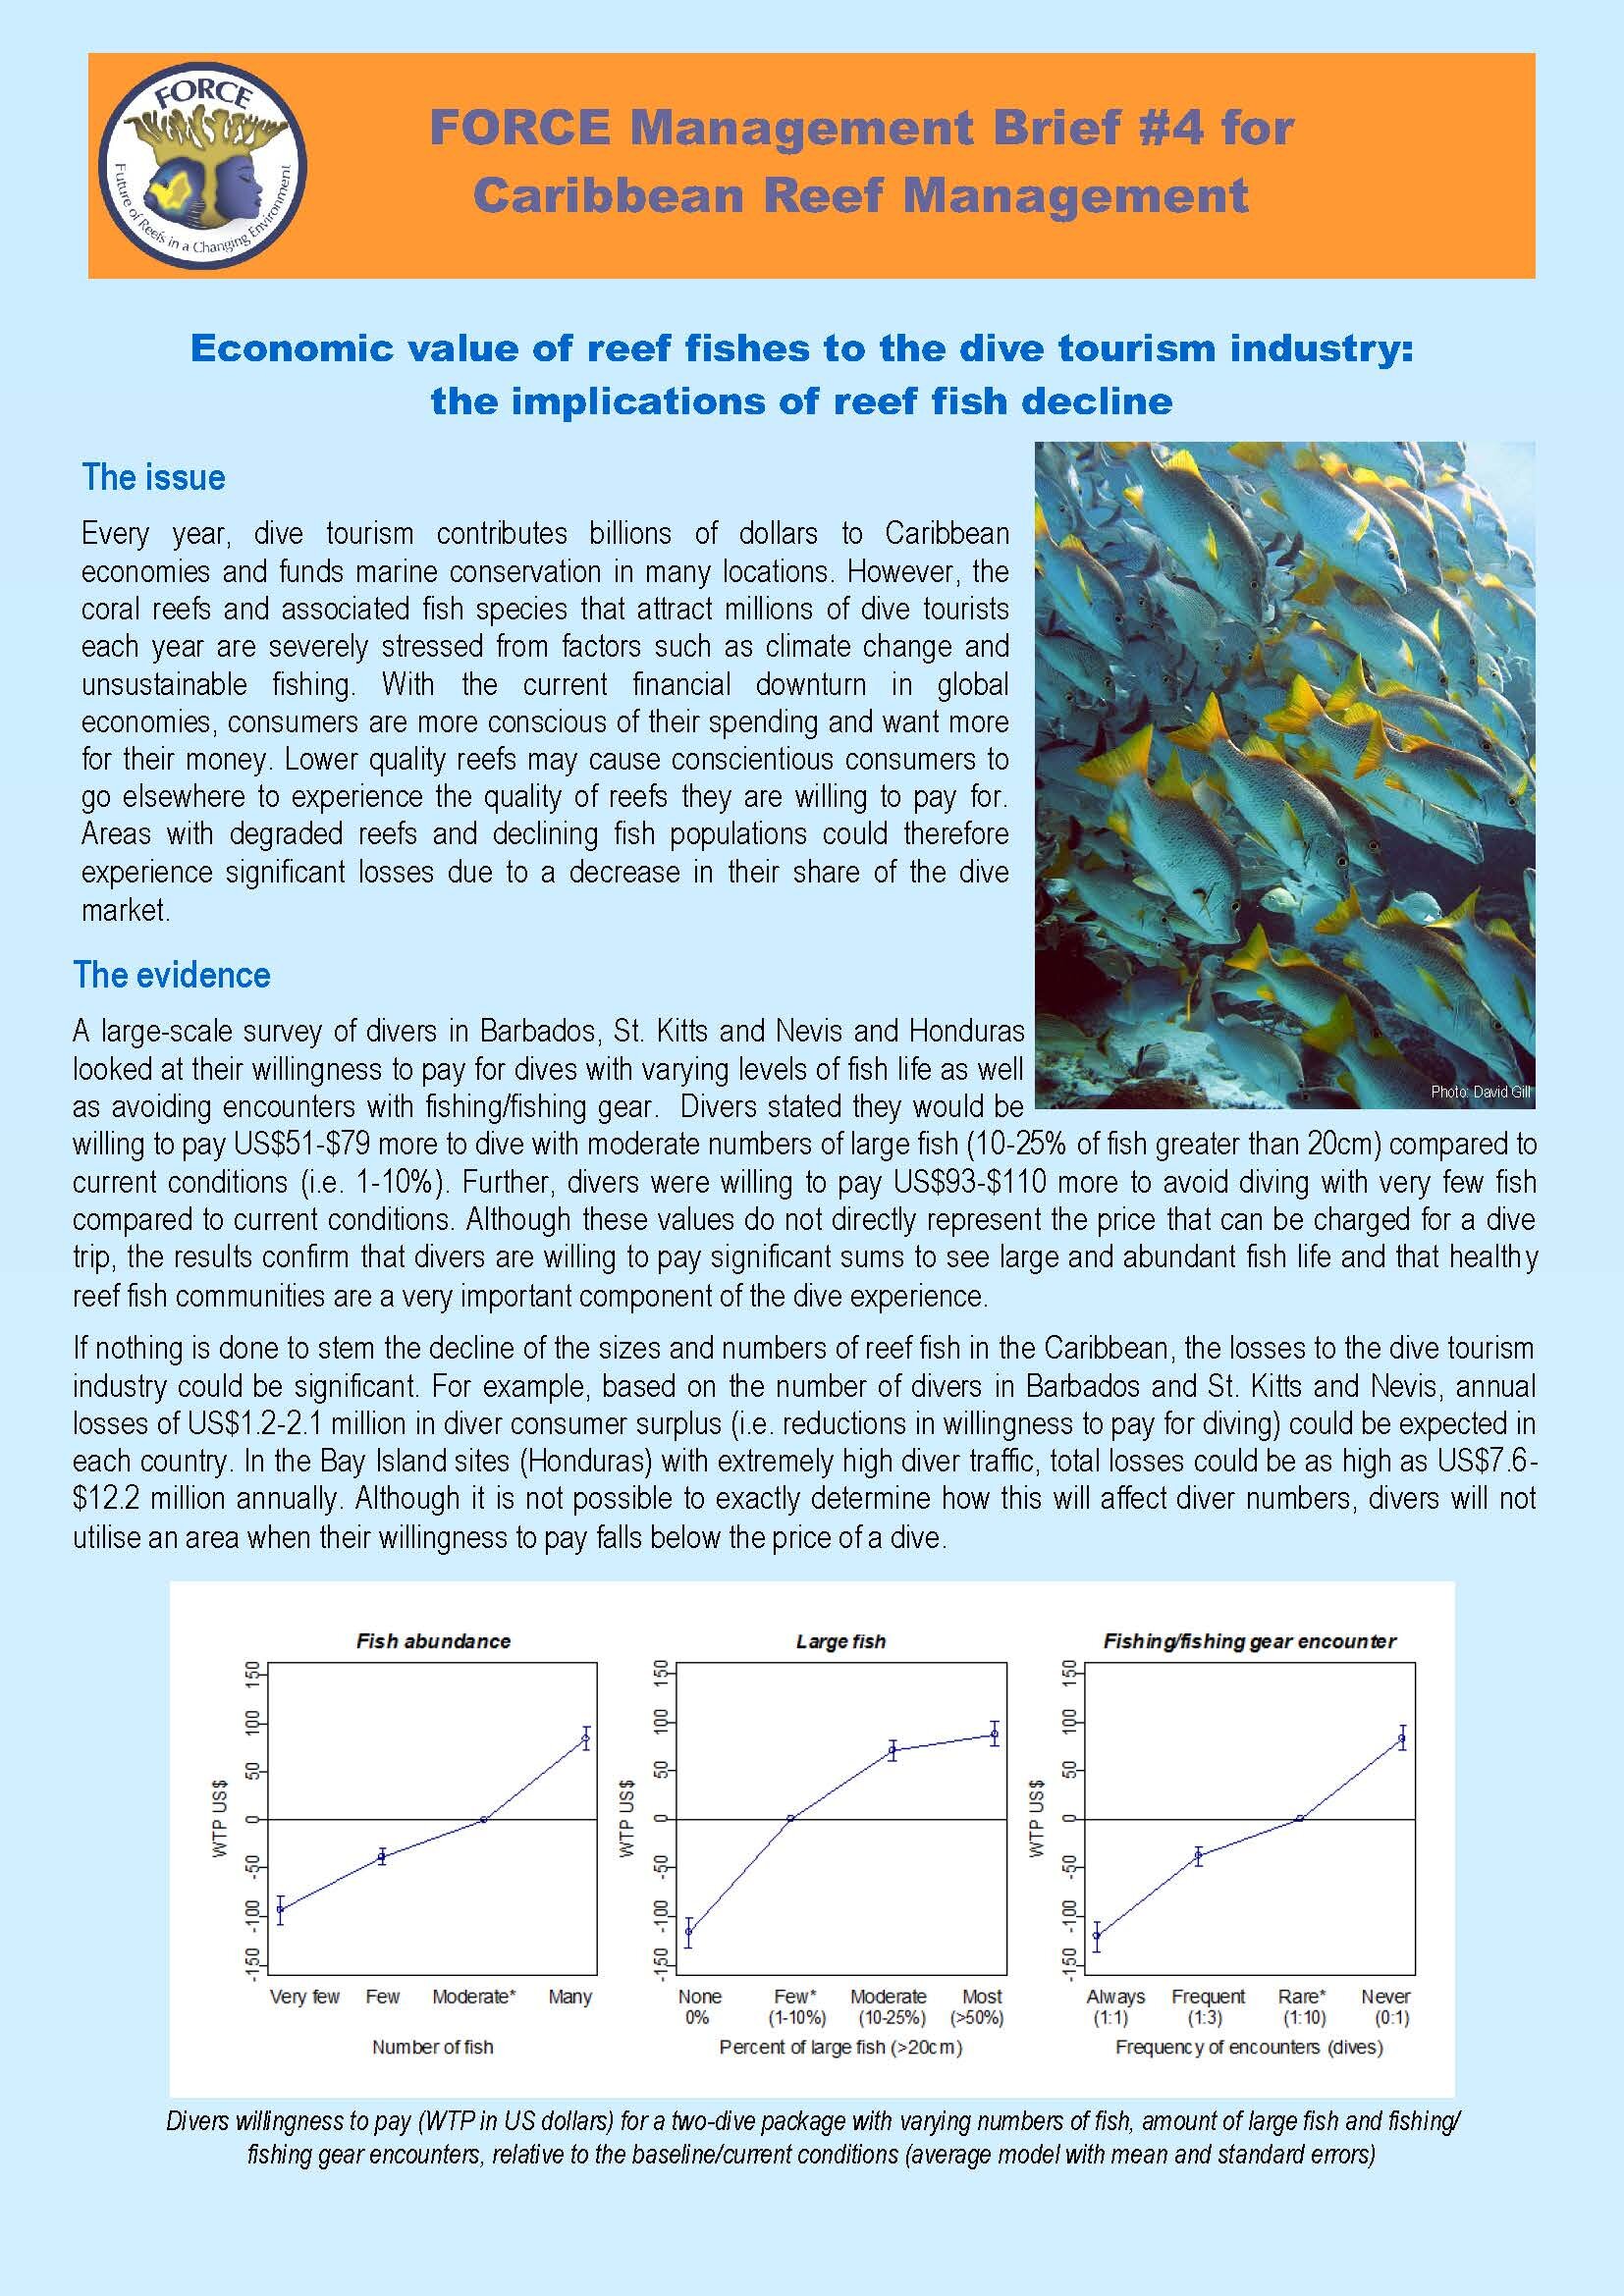 FORCE MBrief 4_Economic value of reef fishes to dive tourism_Pg_1.jpg